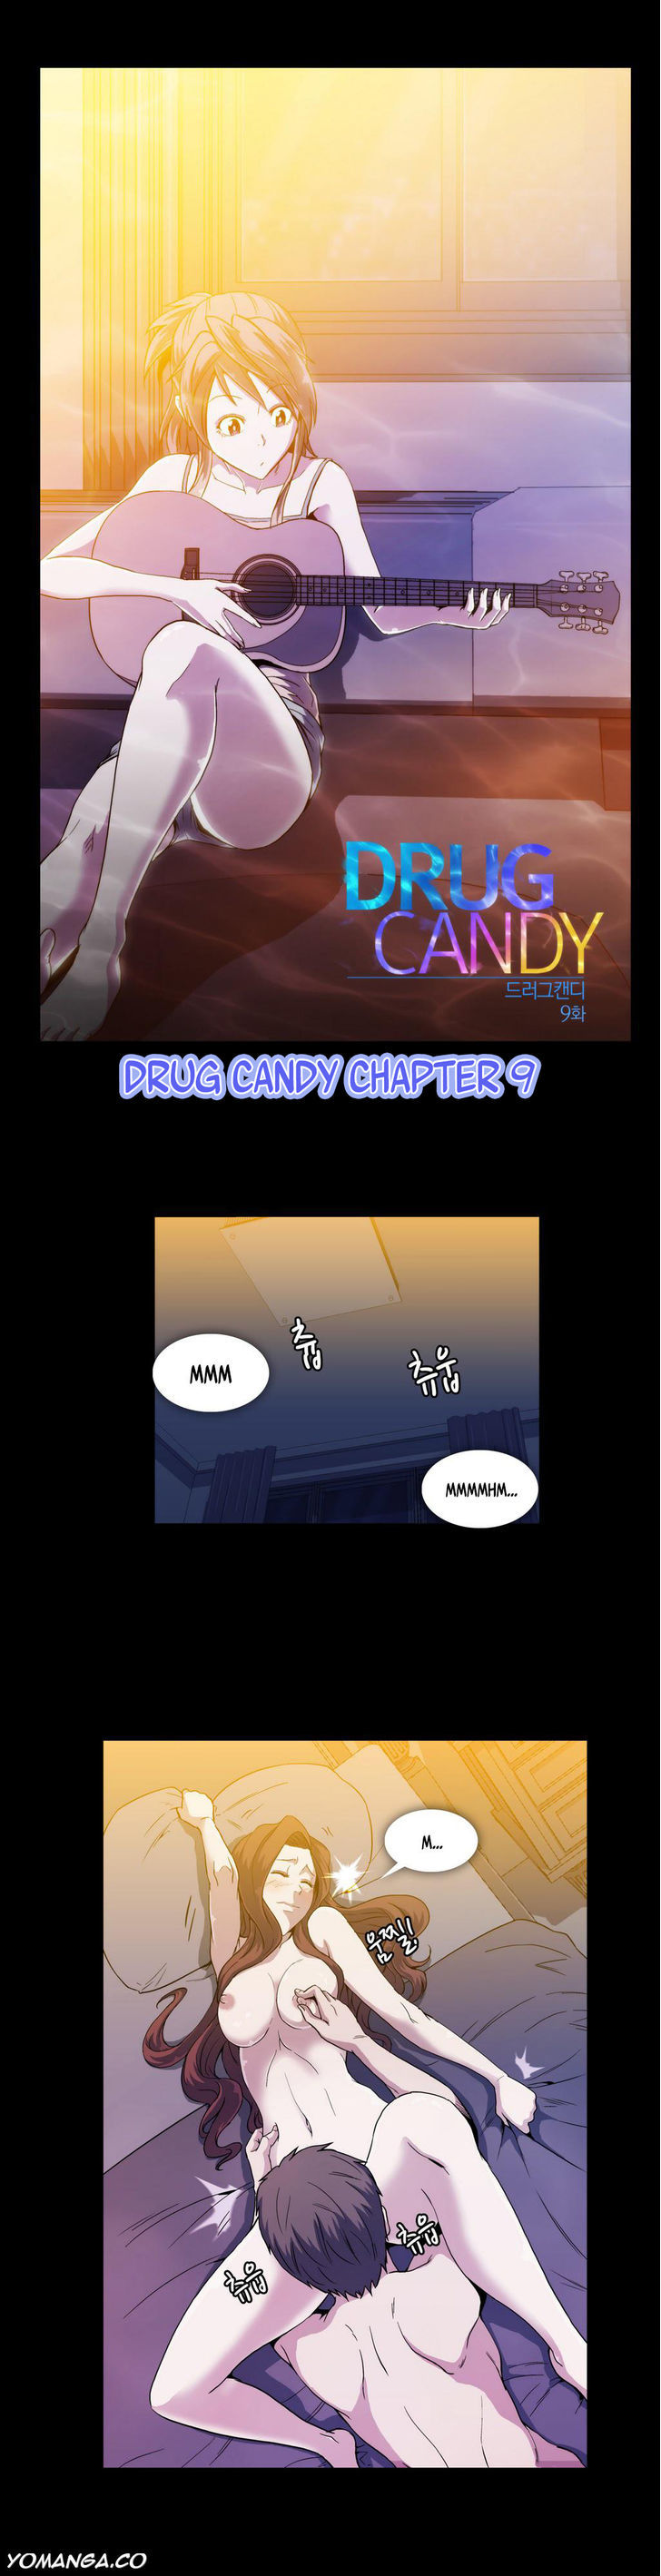 Drug Candy - Chapter 9 Page 2